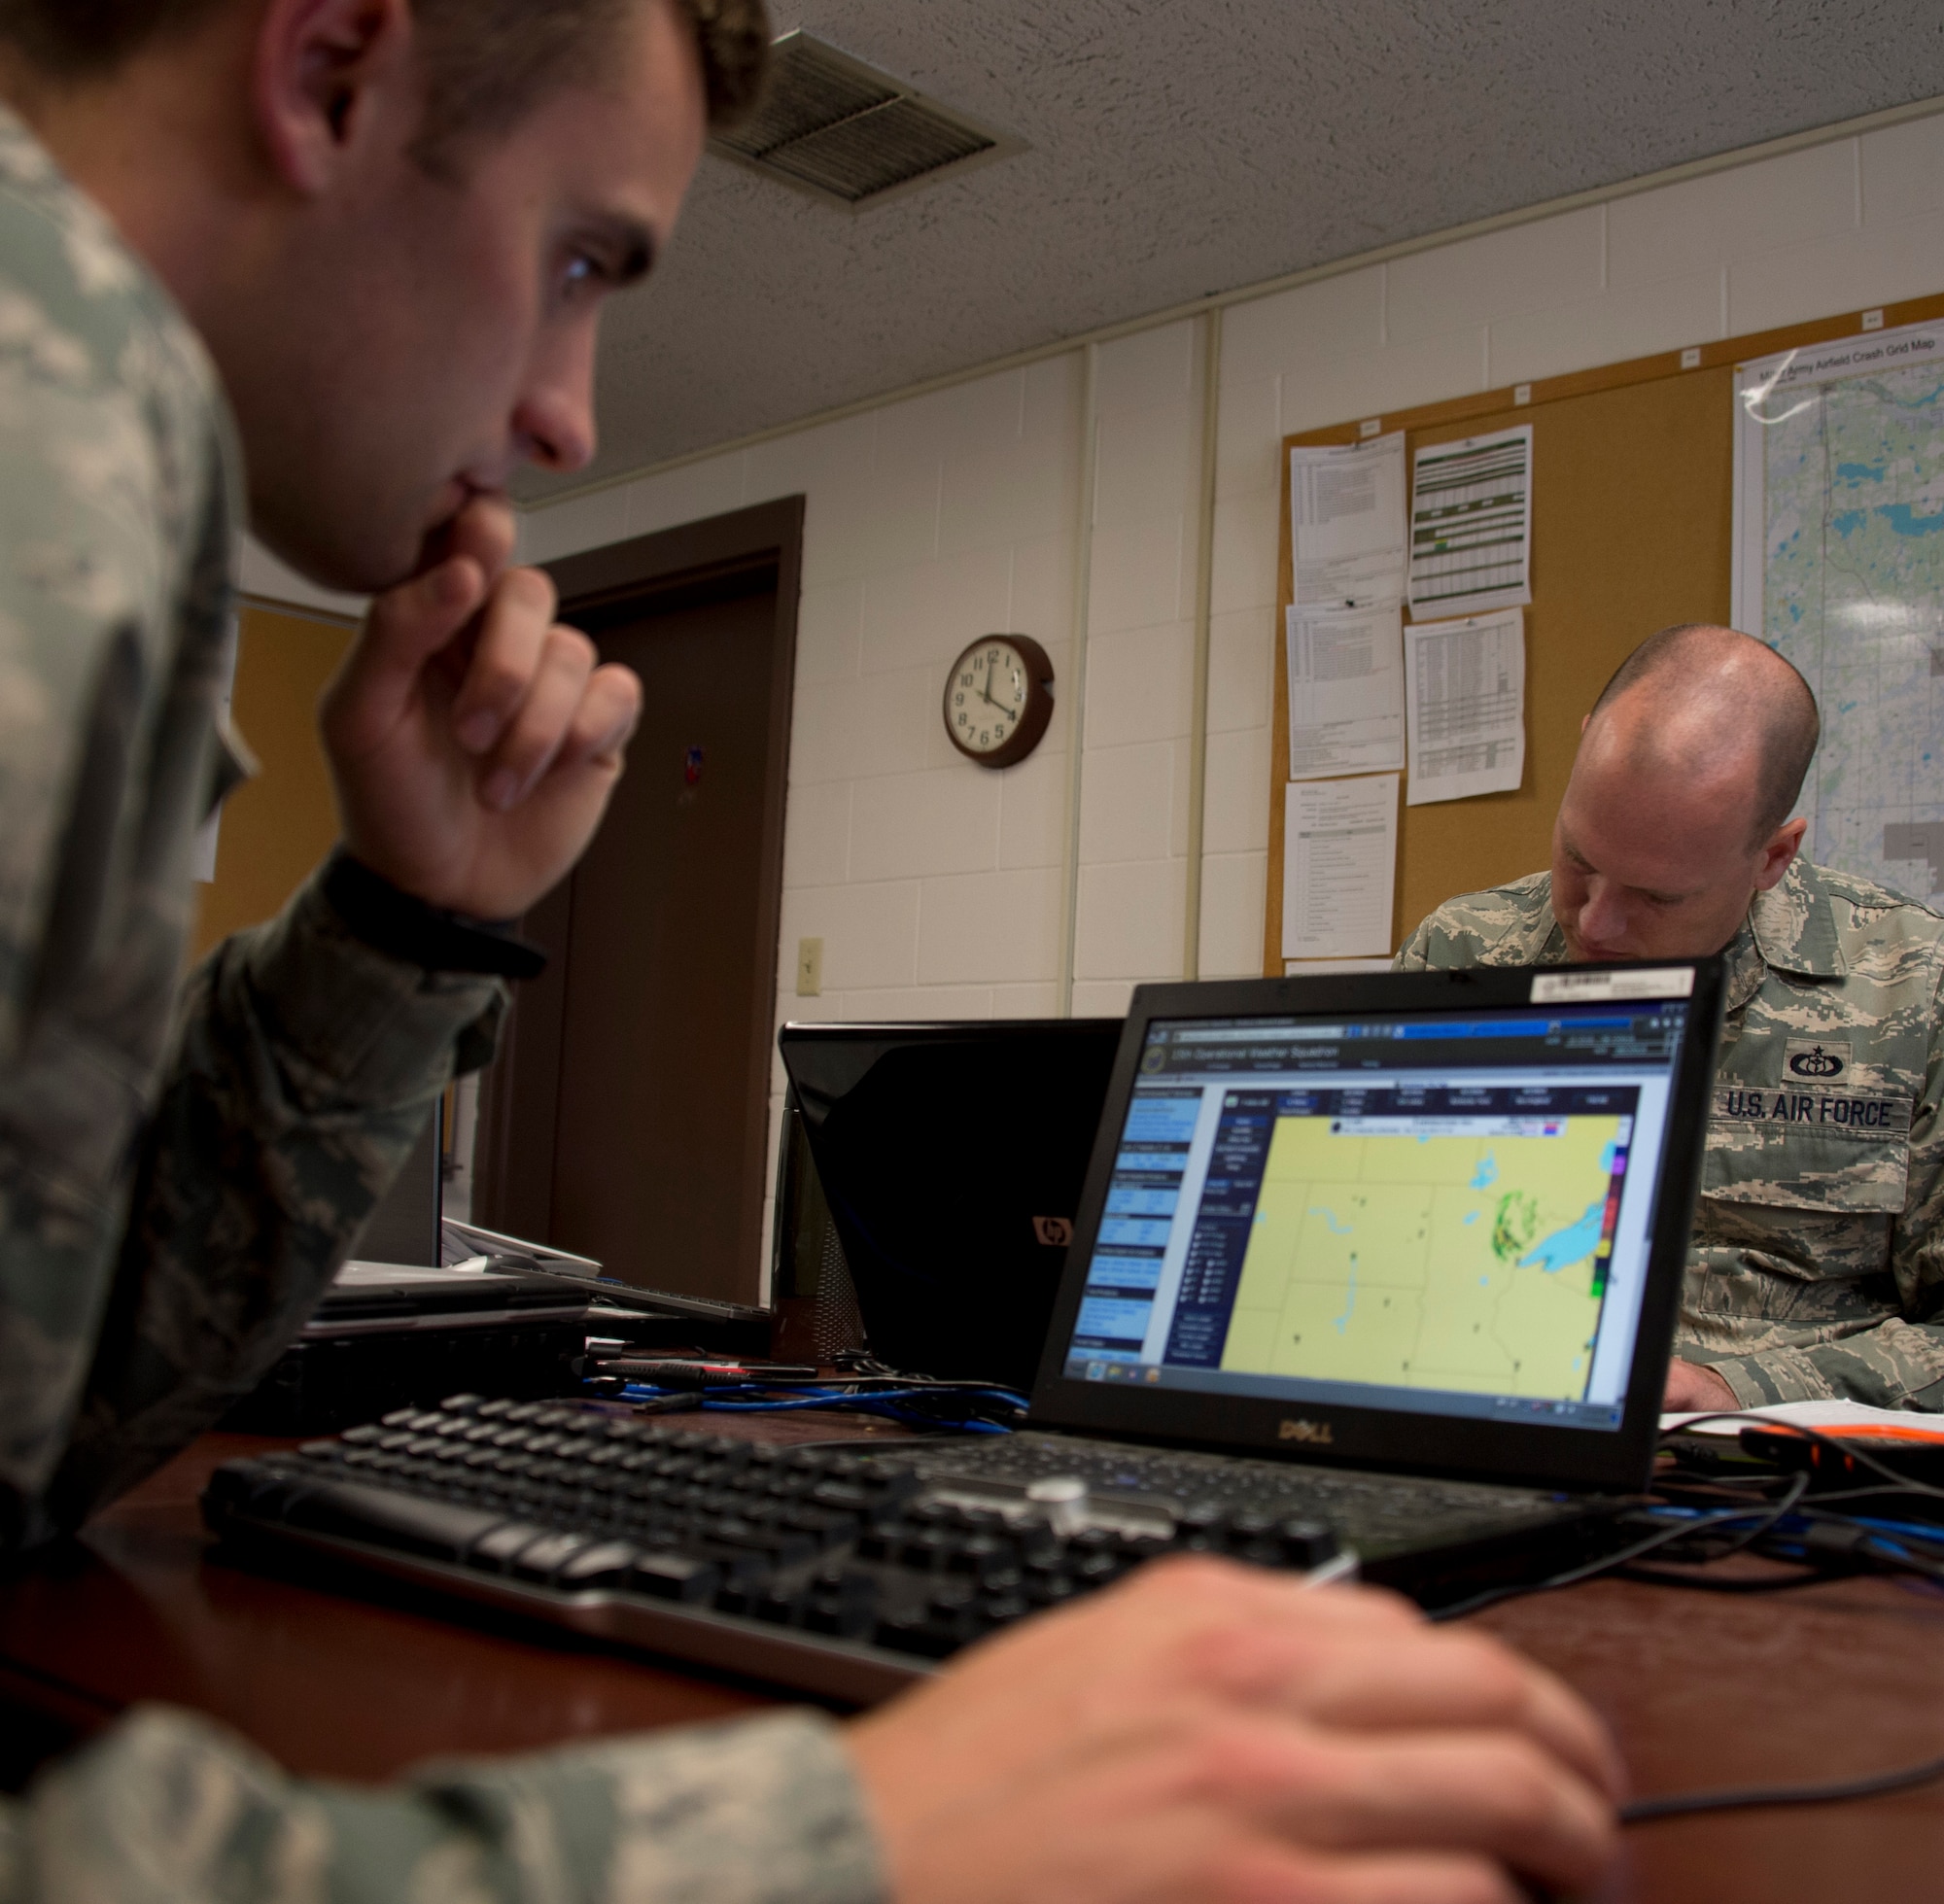 U.S. Air Force Senior Airman Timothy Wigton, 208th Weather Flight, reviews weather conditions over the East Coast while in Little Falls, Minn., June 12, 2014. Wigton is in the last phase of his upgrade skill training during which he was evaluated on his knowledge of weather. 

(U.S. Air National Guard photo by Tech. Sgt. Amy M. Lovgren/Released)